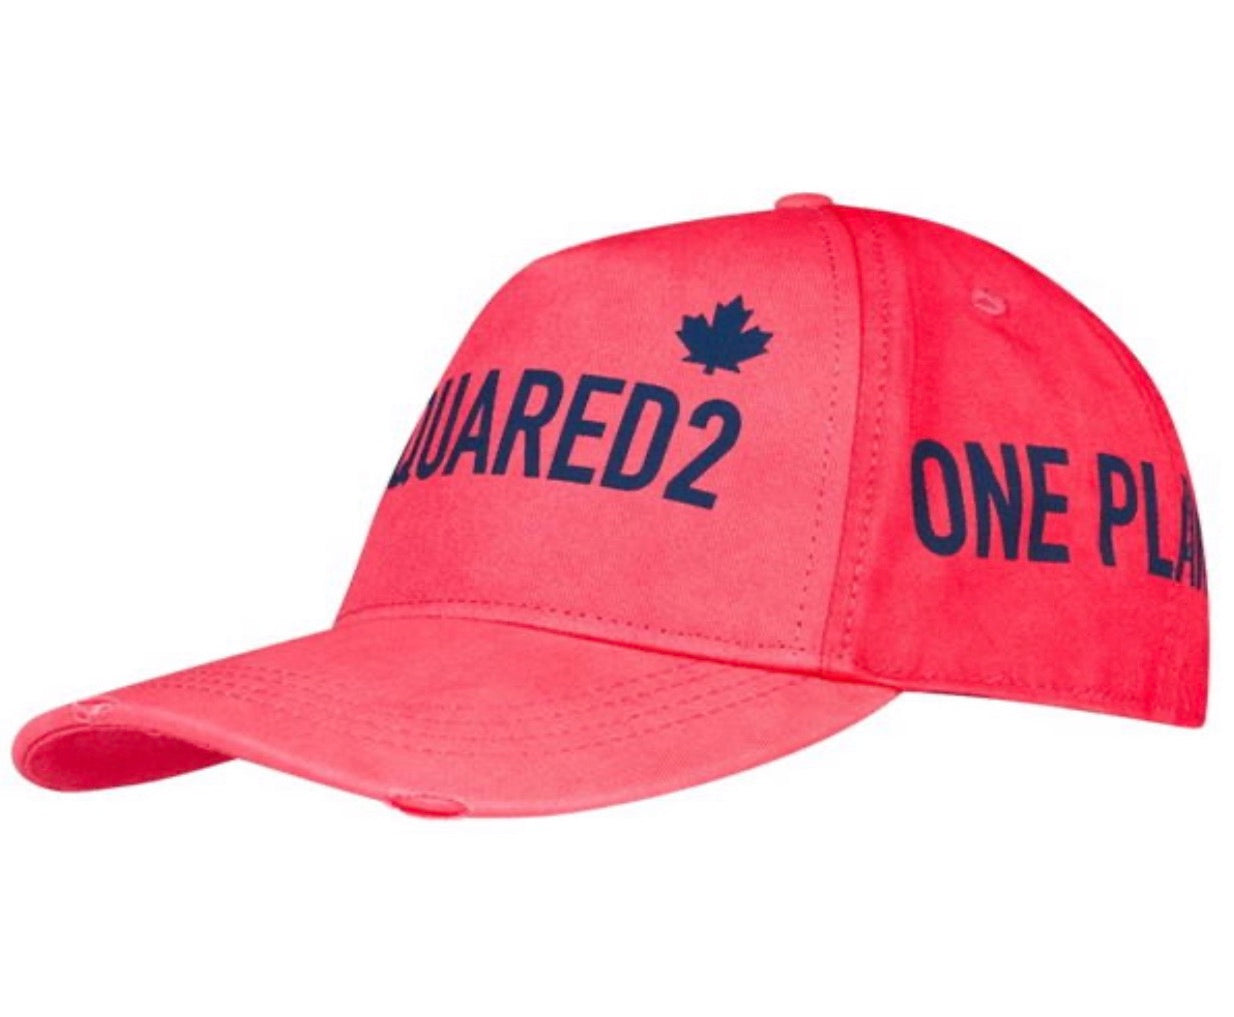 Dsquared2 One Planet Logo Red Cap